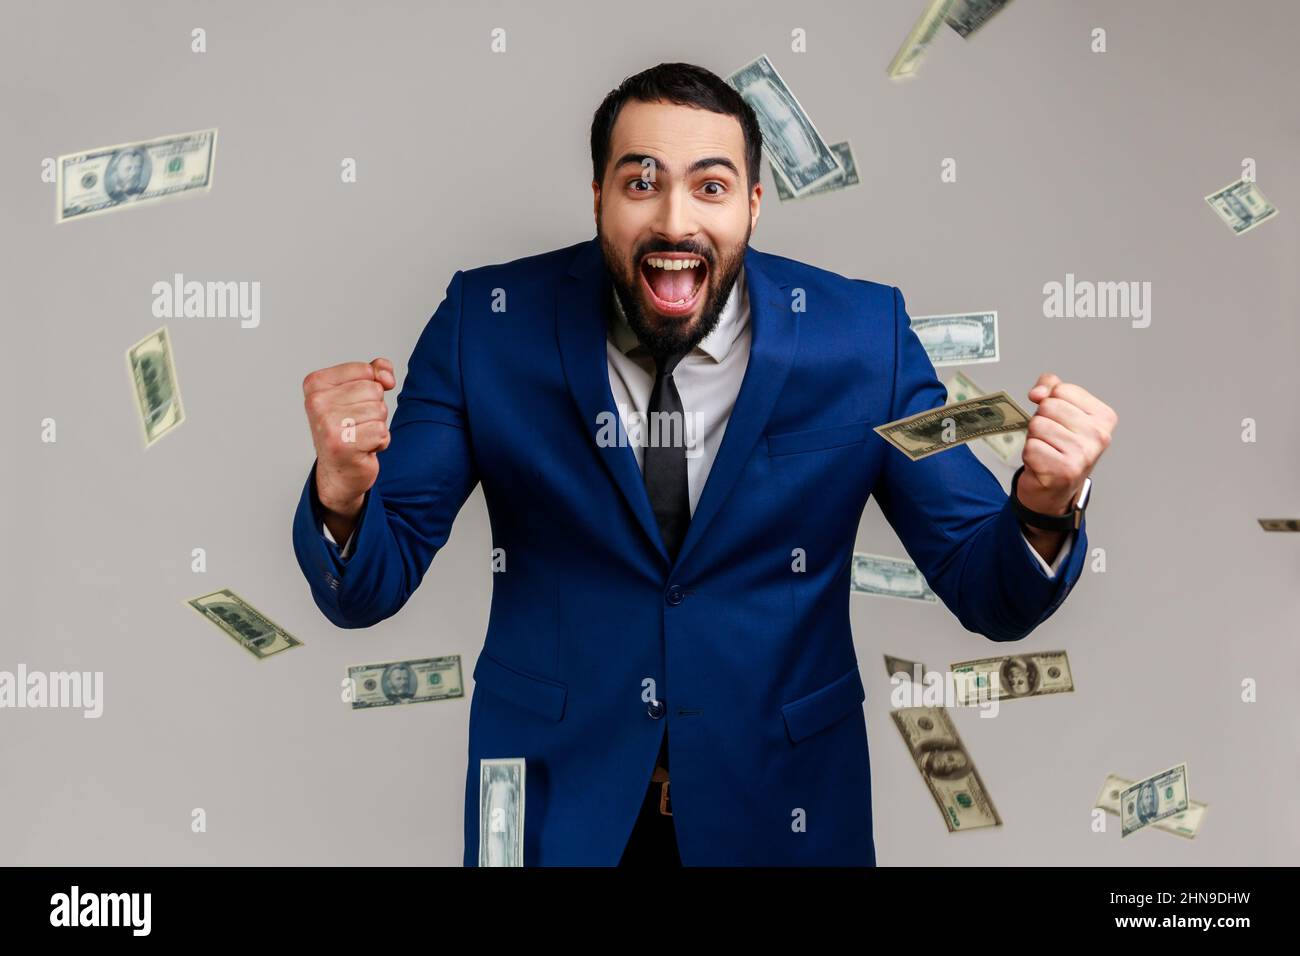 Excited bearded man standing under money with clenched fists and yelling happily, celebrating victory and richness, wearing official style suit. Indoor studio shot isolated on gray background. Stock Photo